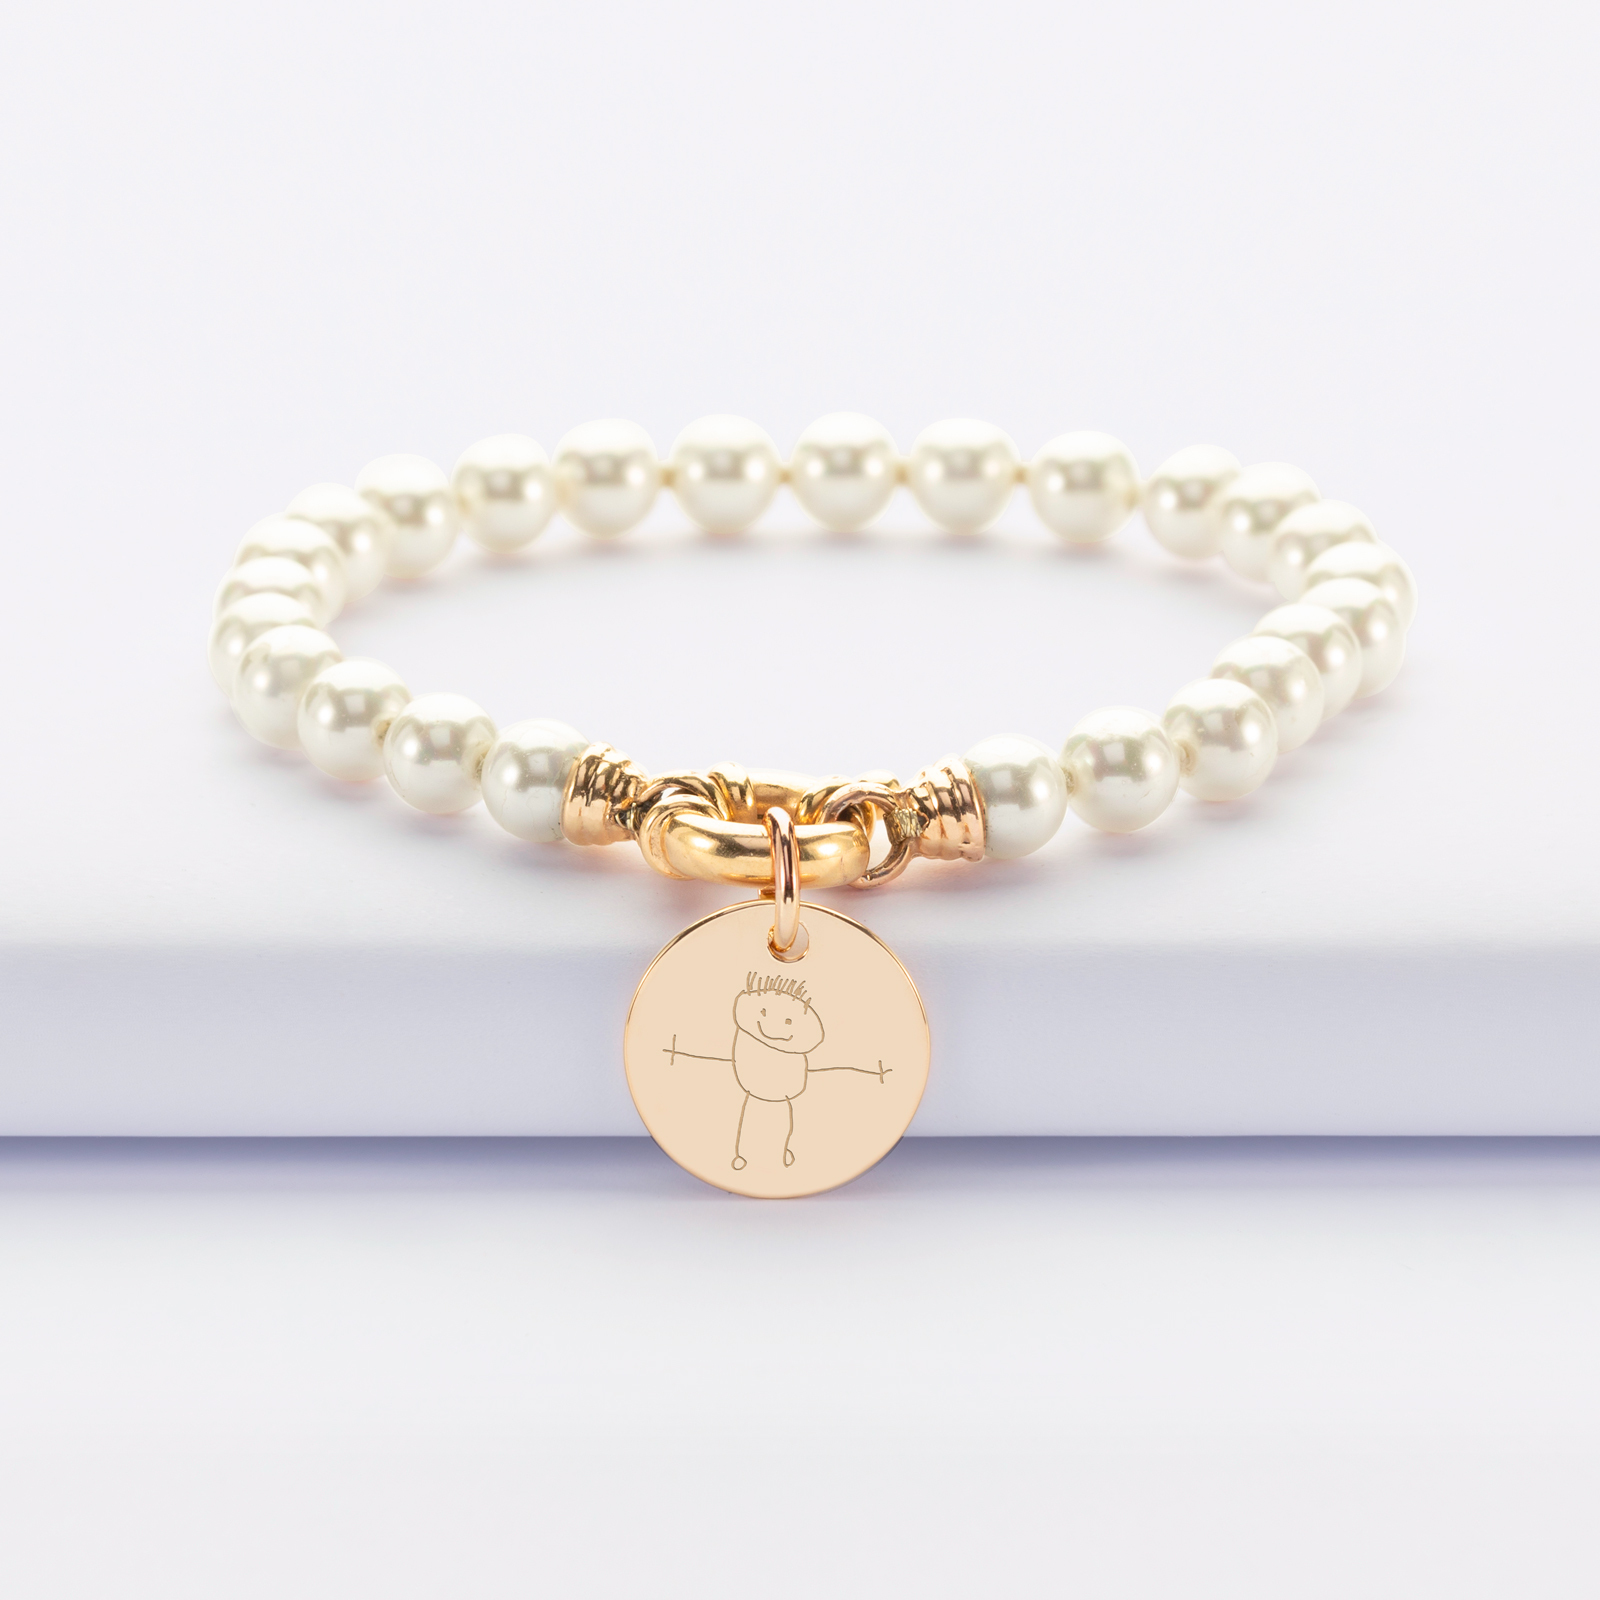 Personalized bracelet Majorca pearls clasp engraved medal gold plated 15 mm